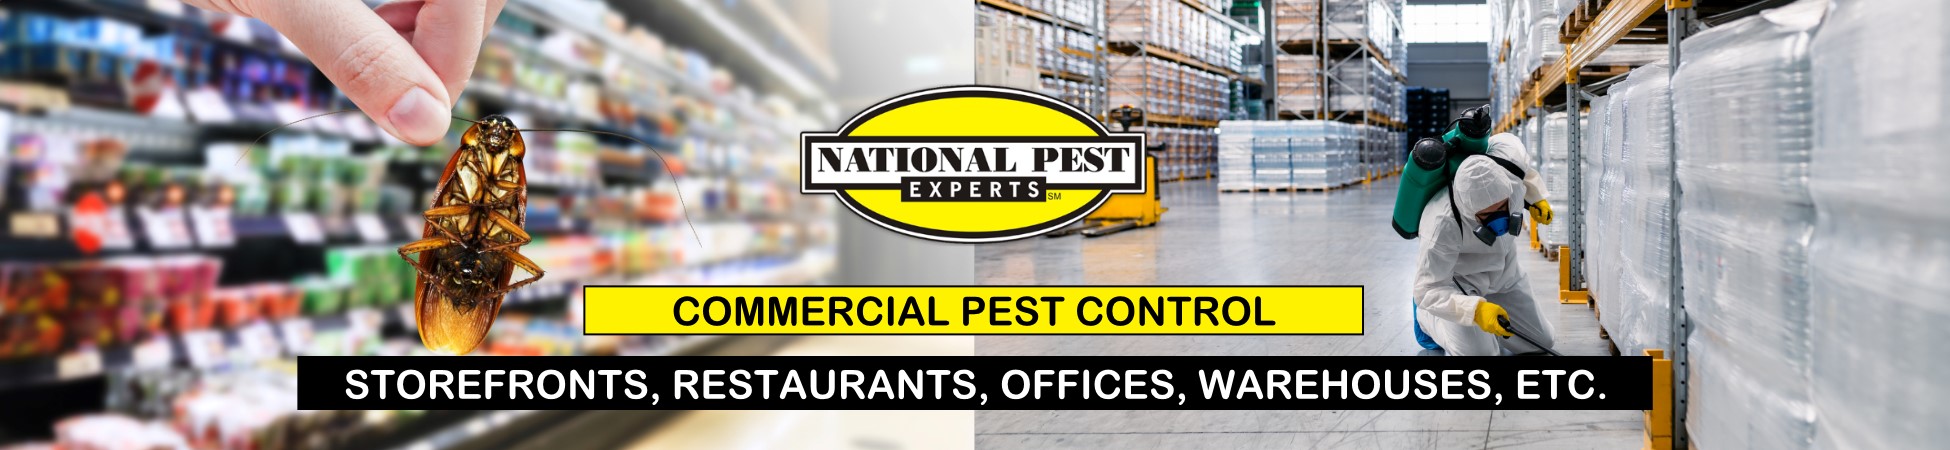 National Pest Experts - Commercial & Industrial exterminating and pest control in Cold Spring Harbor, NY